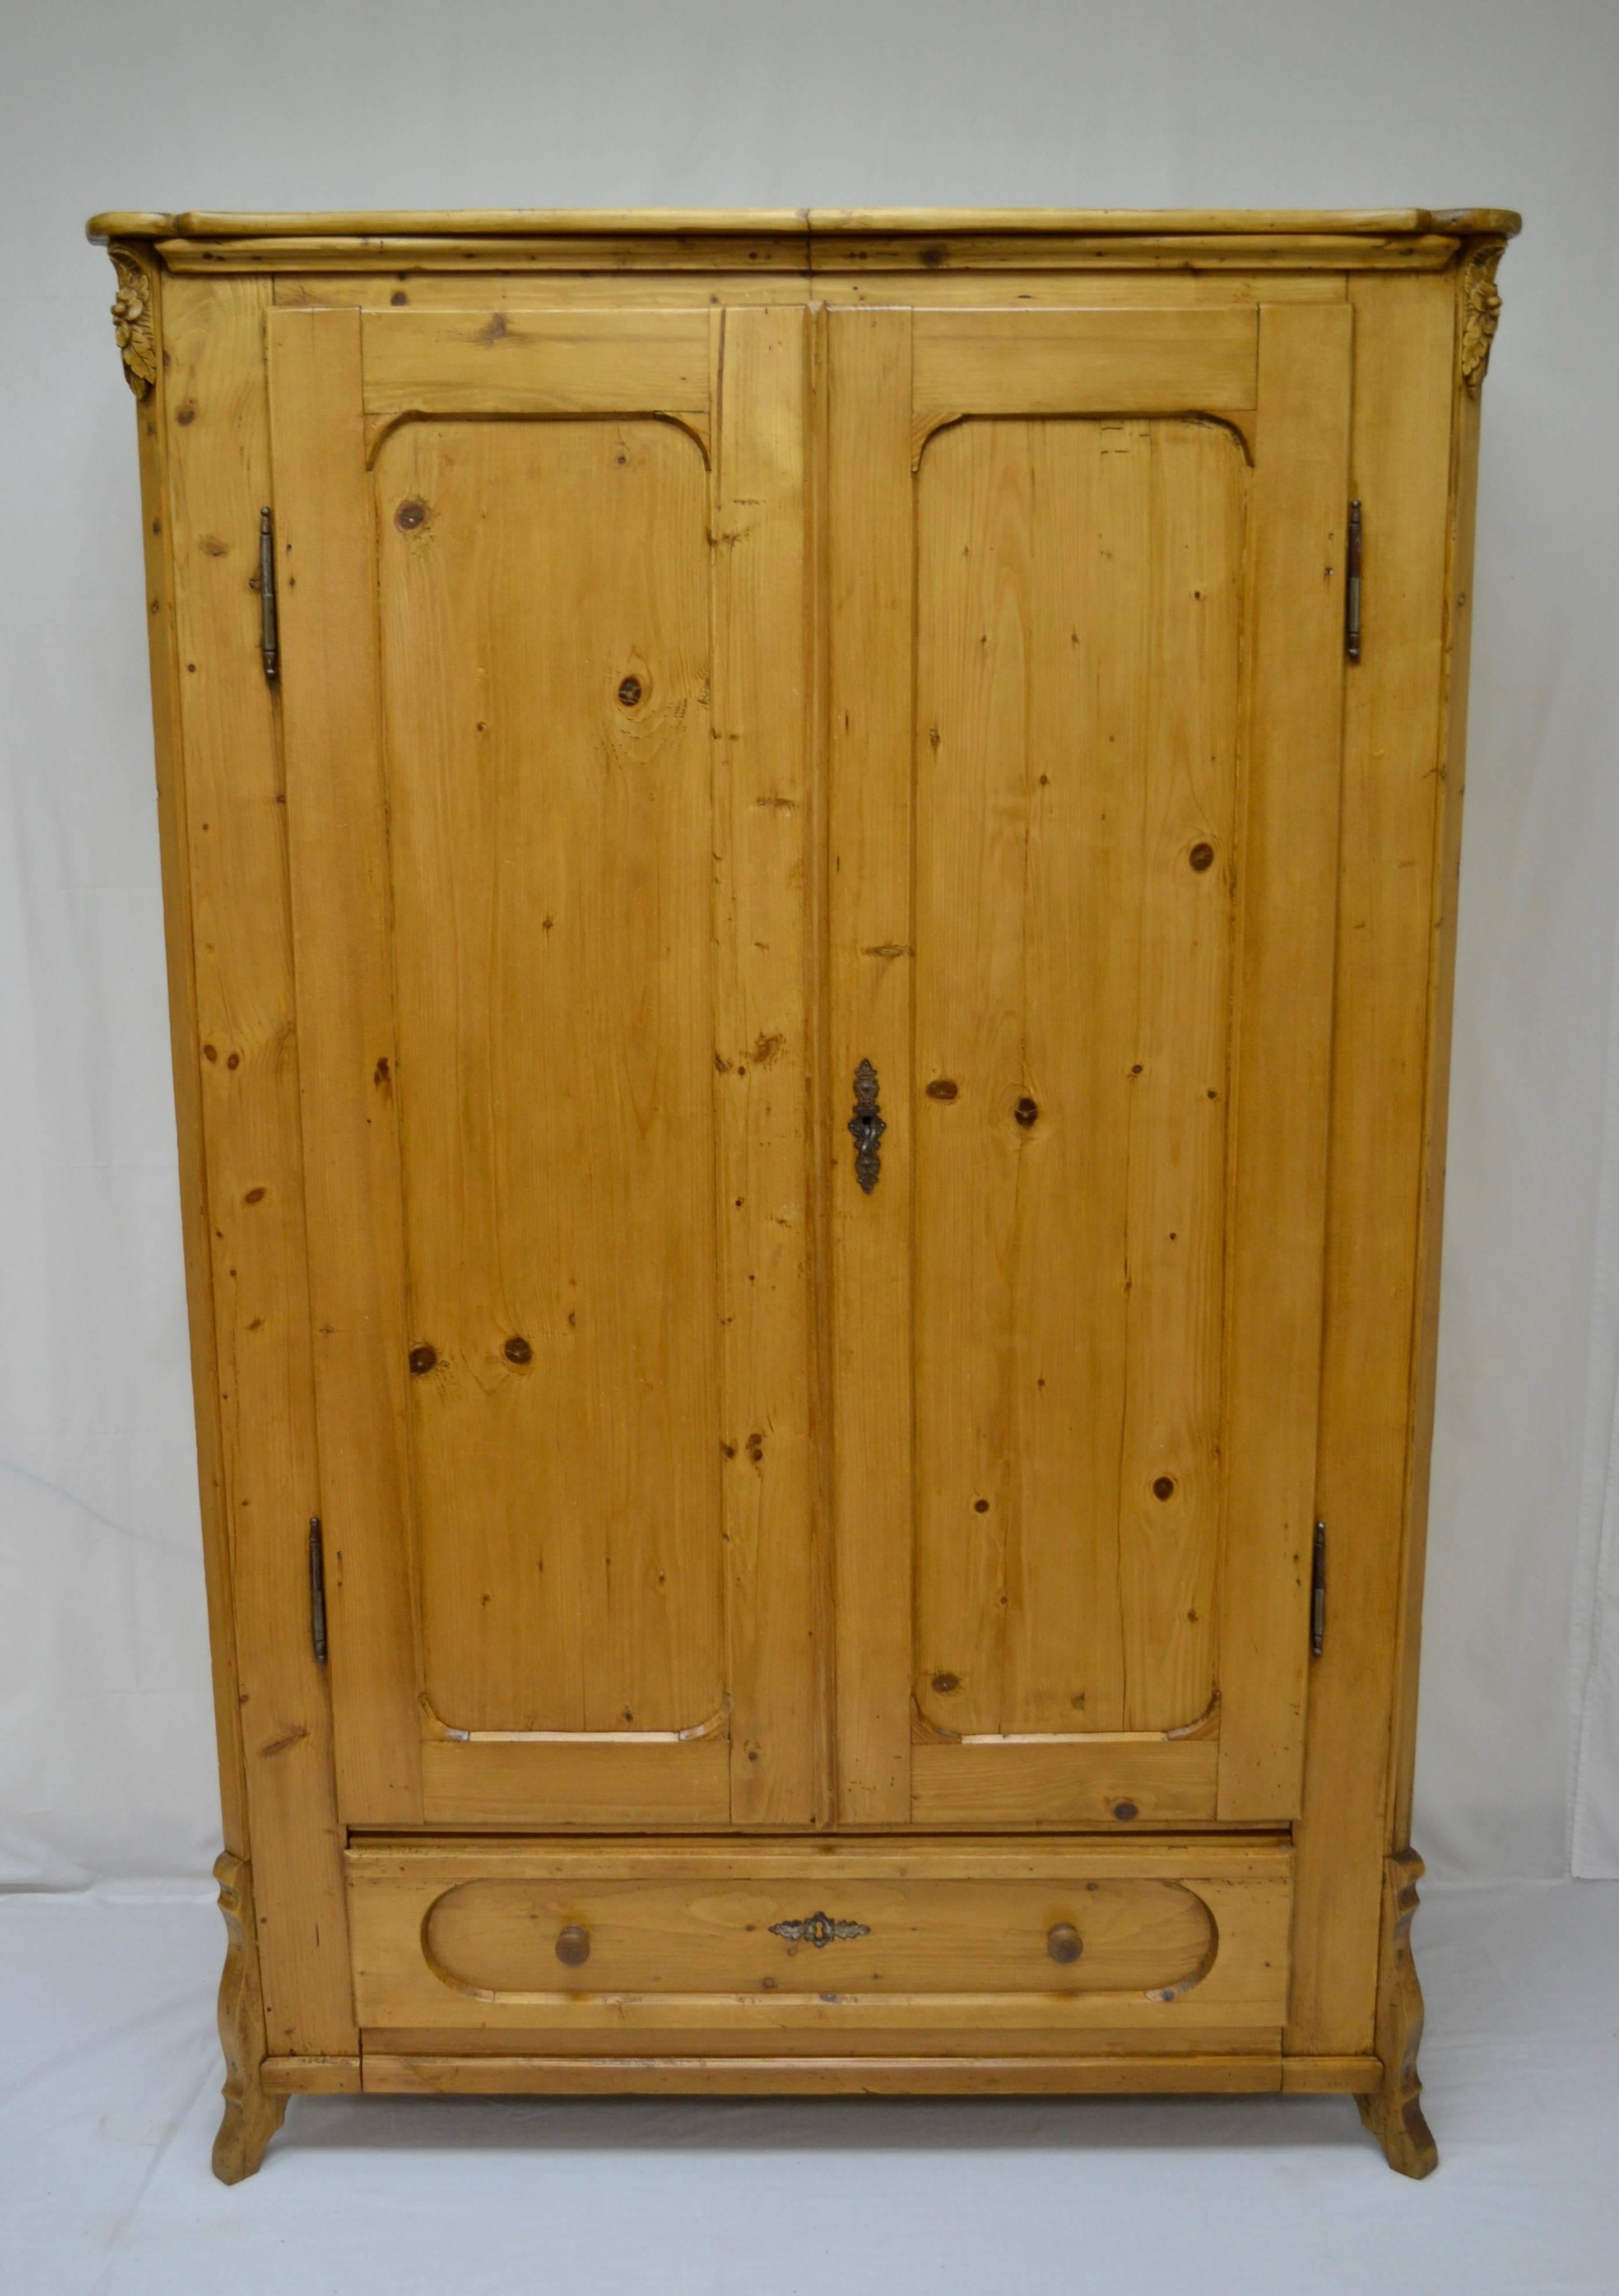 This lovely two door pine armoire features a scalloped crown with rounded corners and hand-carved oak leaf and acorn corbels mounted to the chamfered front corners. The panelled doors are mounted on iron fiche hinges allowing them to open a full 180